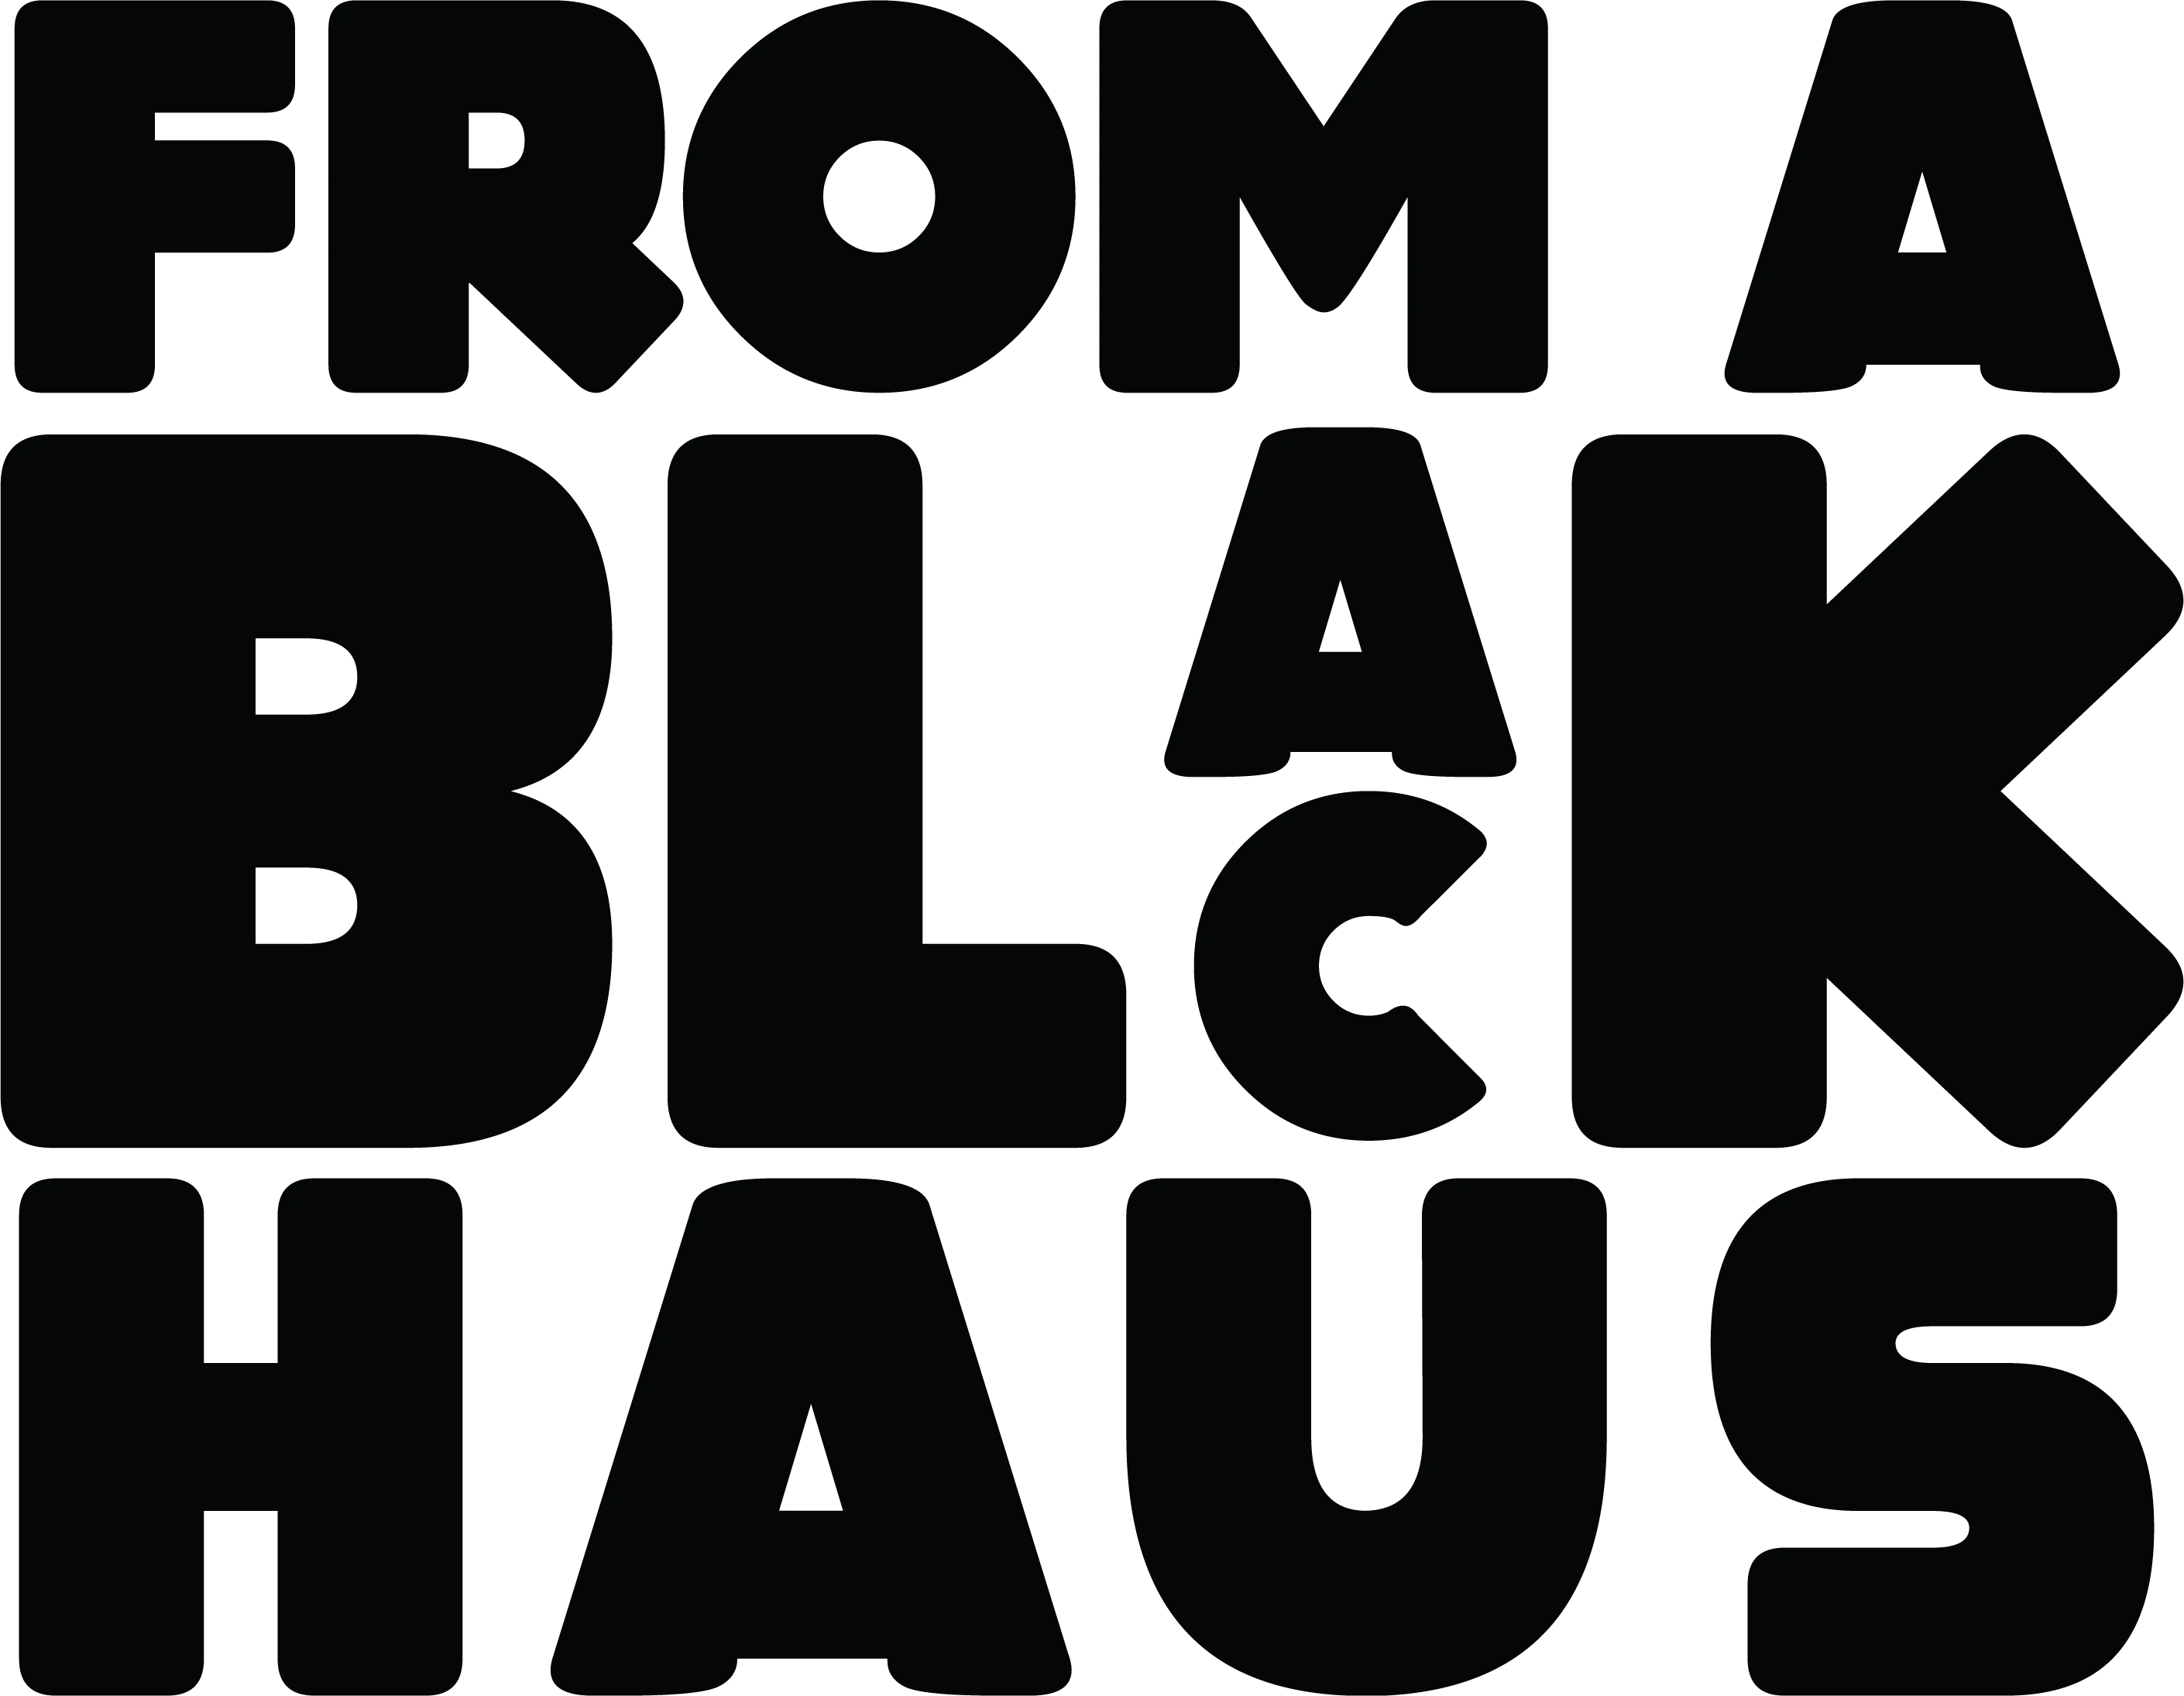 From A Black Haus E-Comm store logo